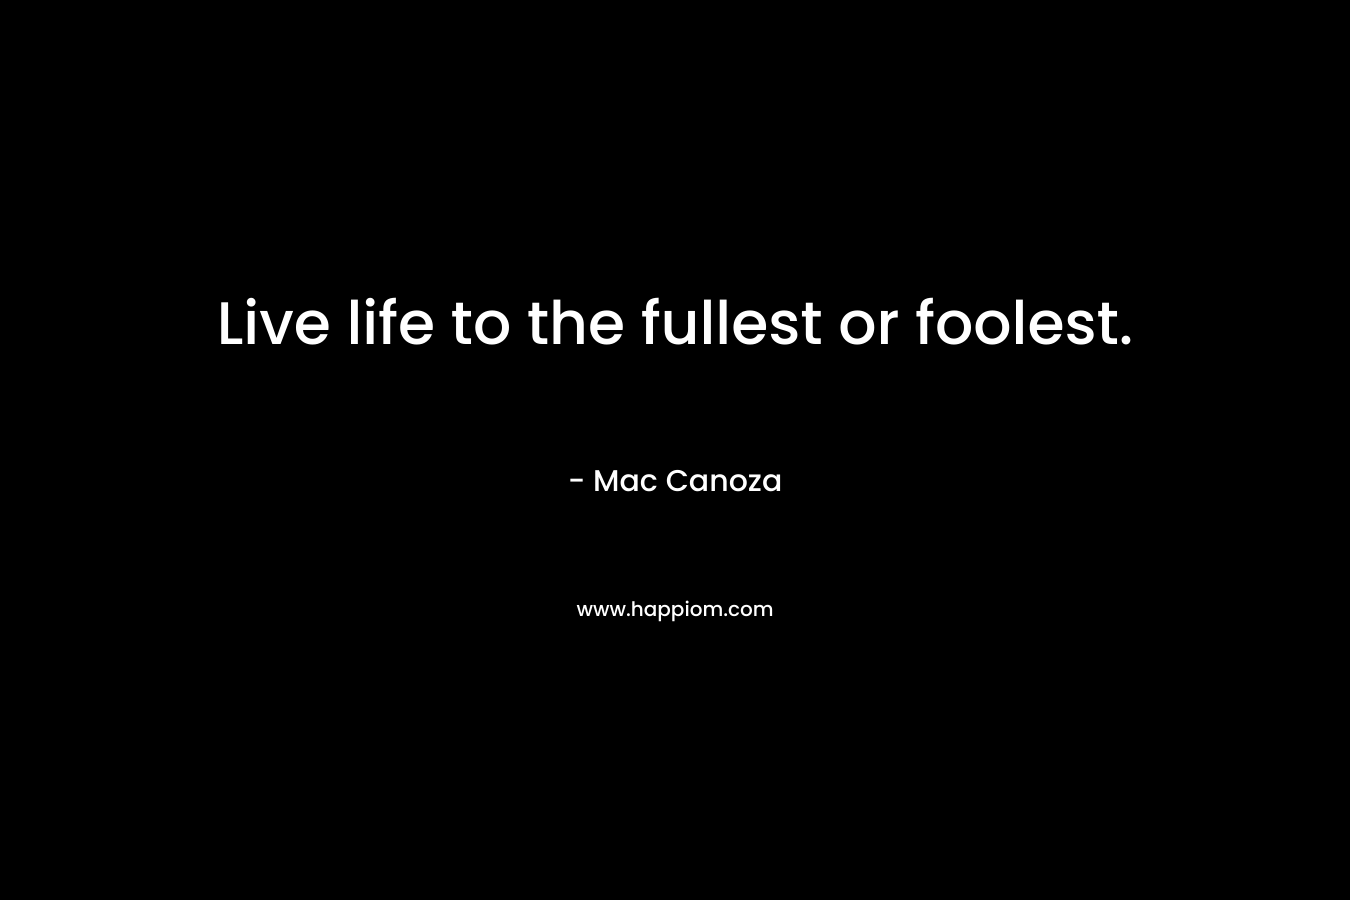 Live life to the fullest or foolest.